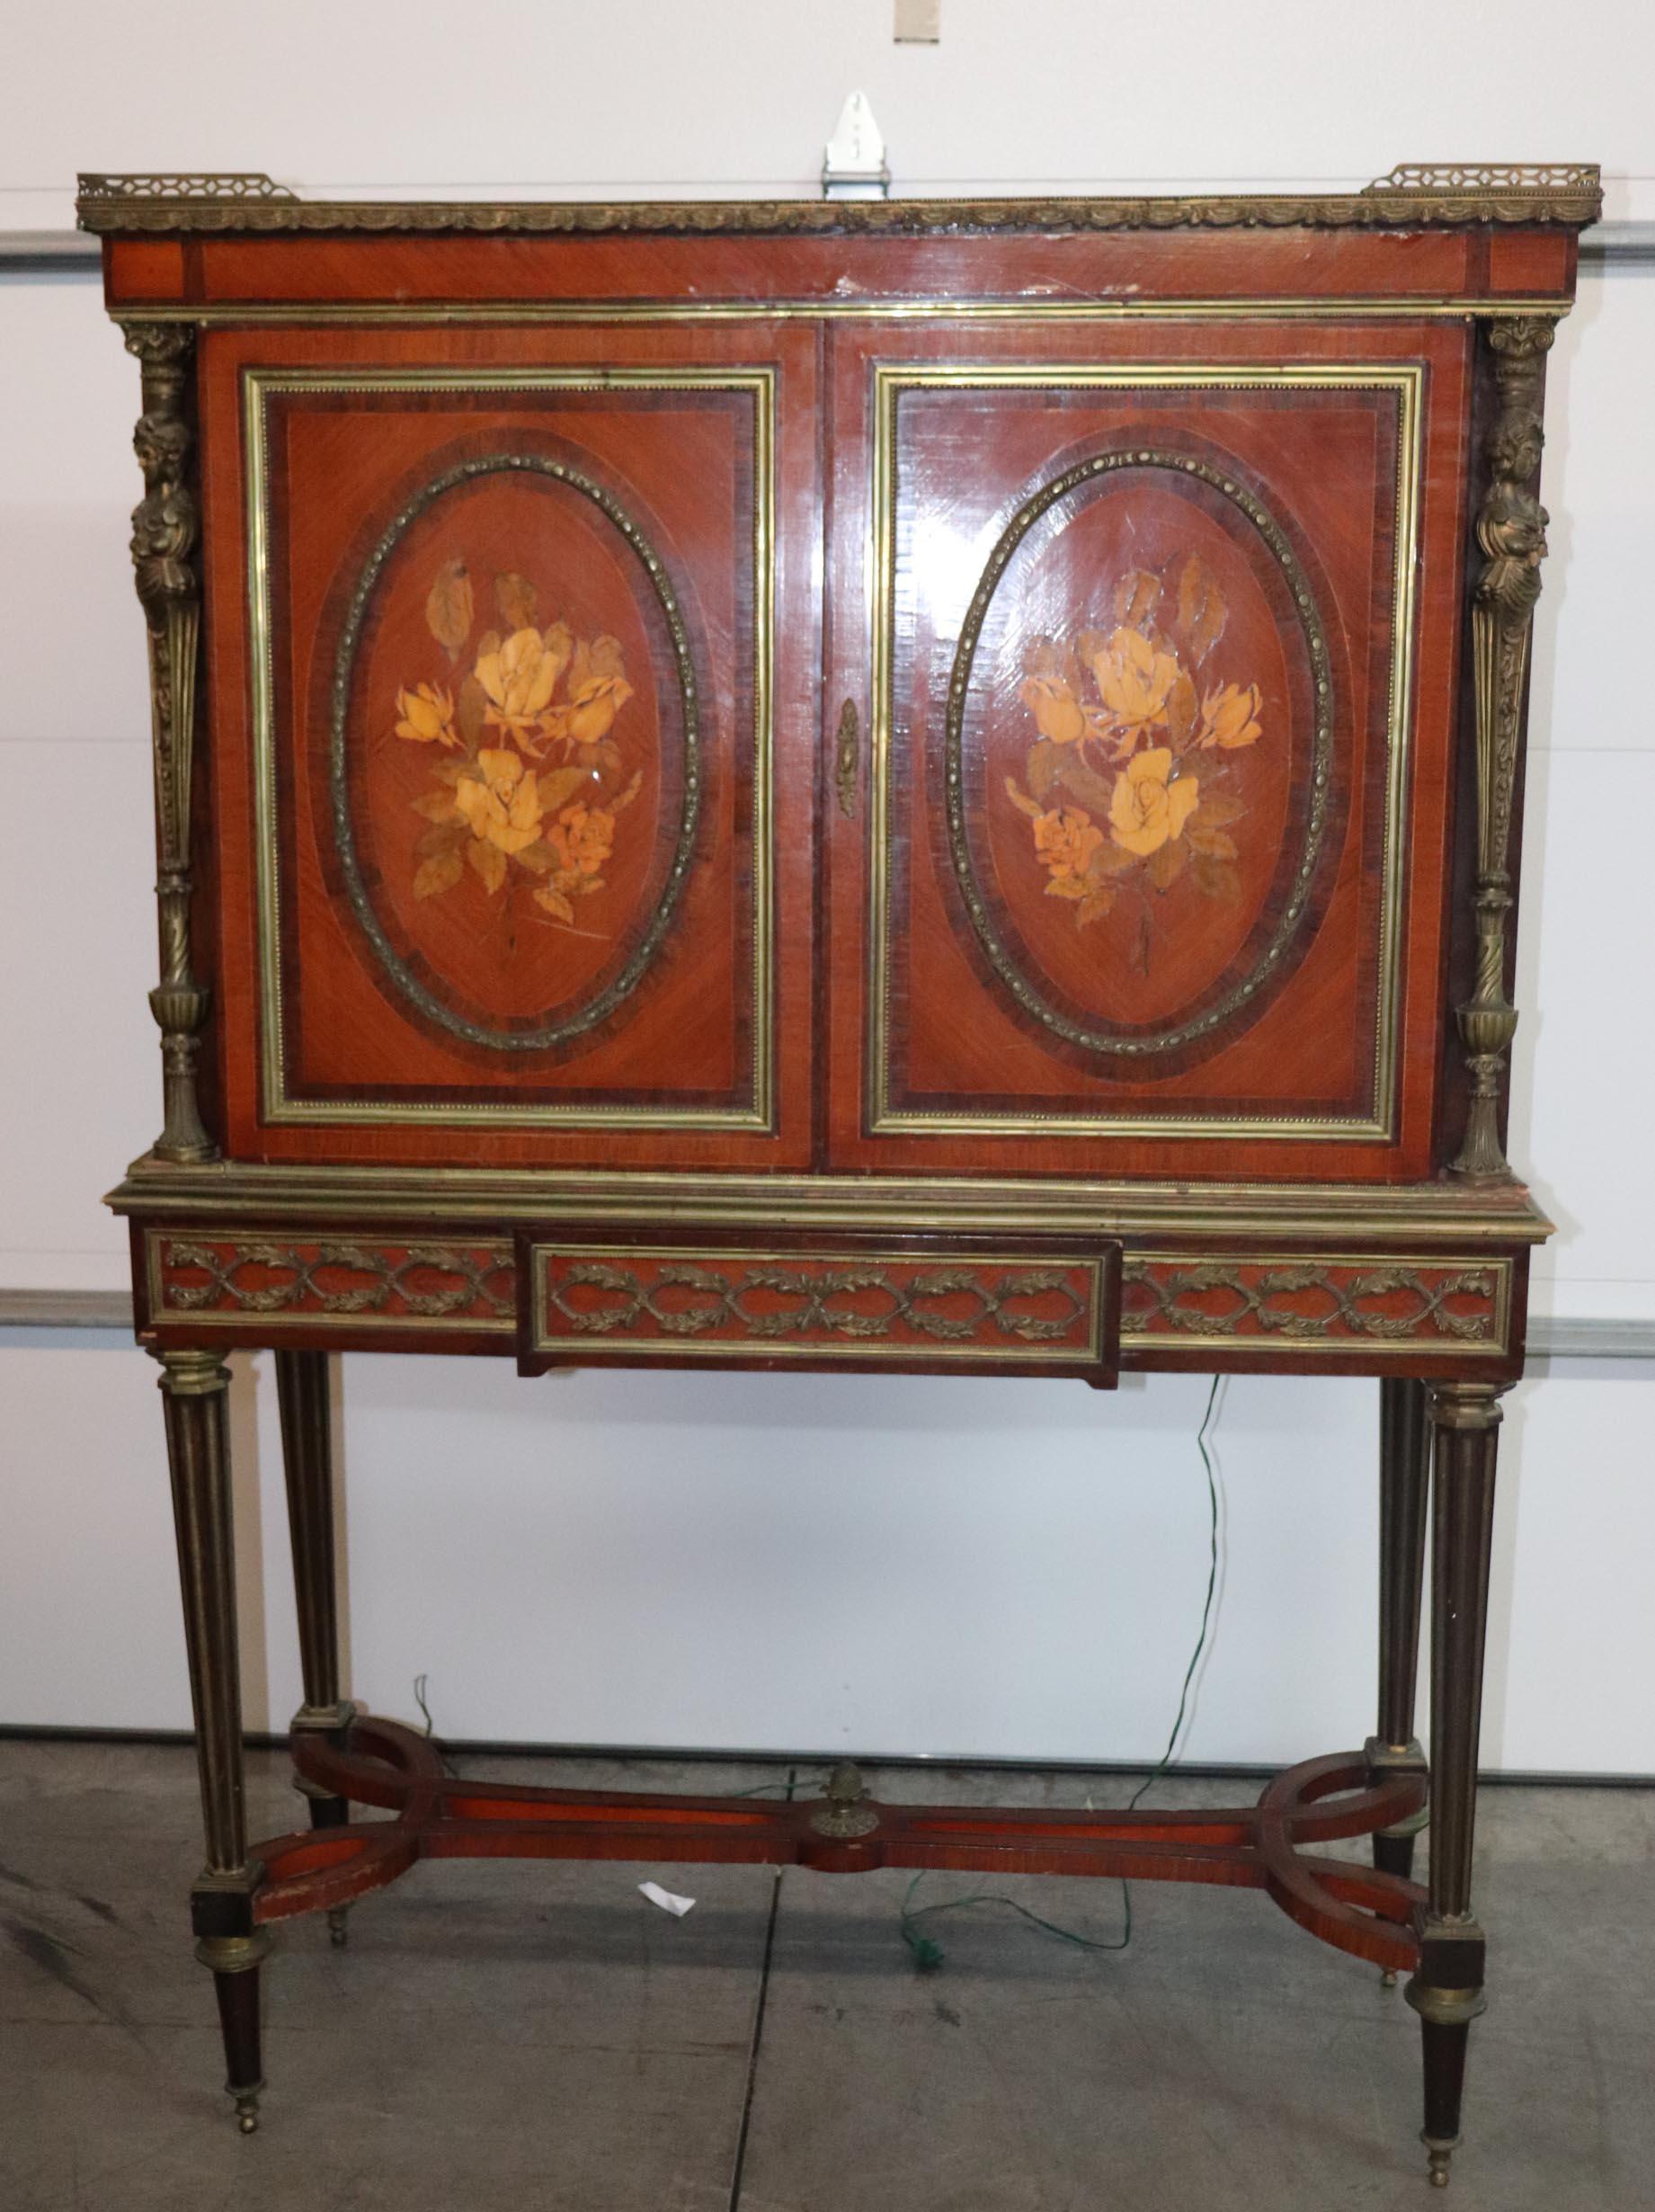 This is a stunning 1900s era (1890-1920) vitrine or collector's cabinet designed in the manner of Adam Weisweiler one of France's best known cabinetmakers who frequently used figural maidens and copious amounts of inlay and bronze. The piece is in